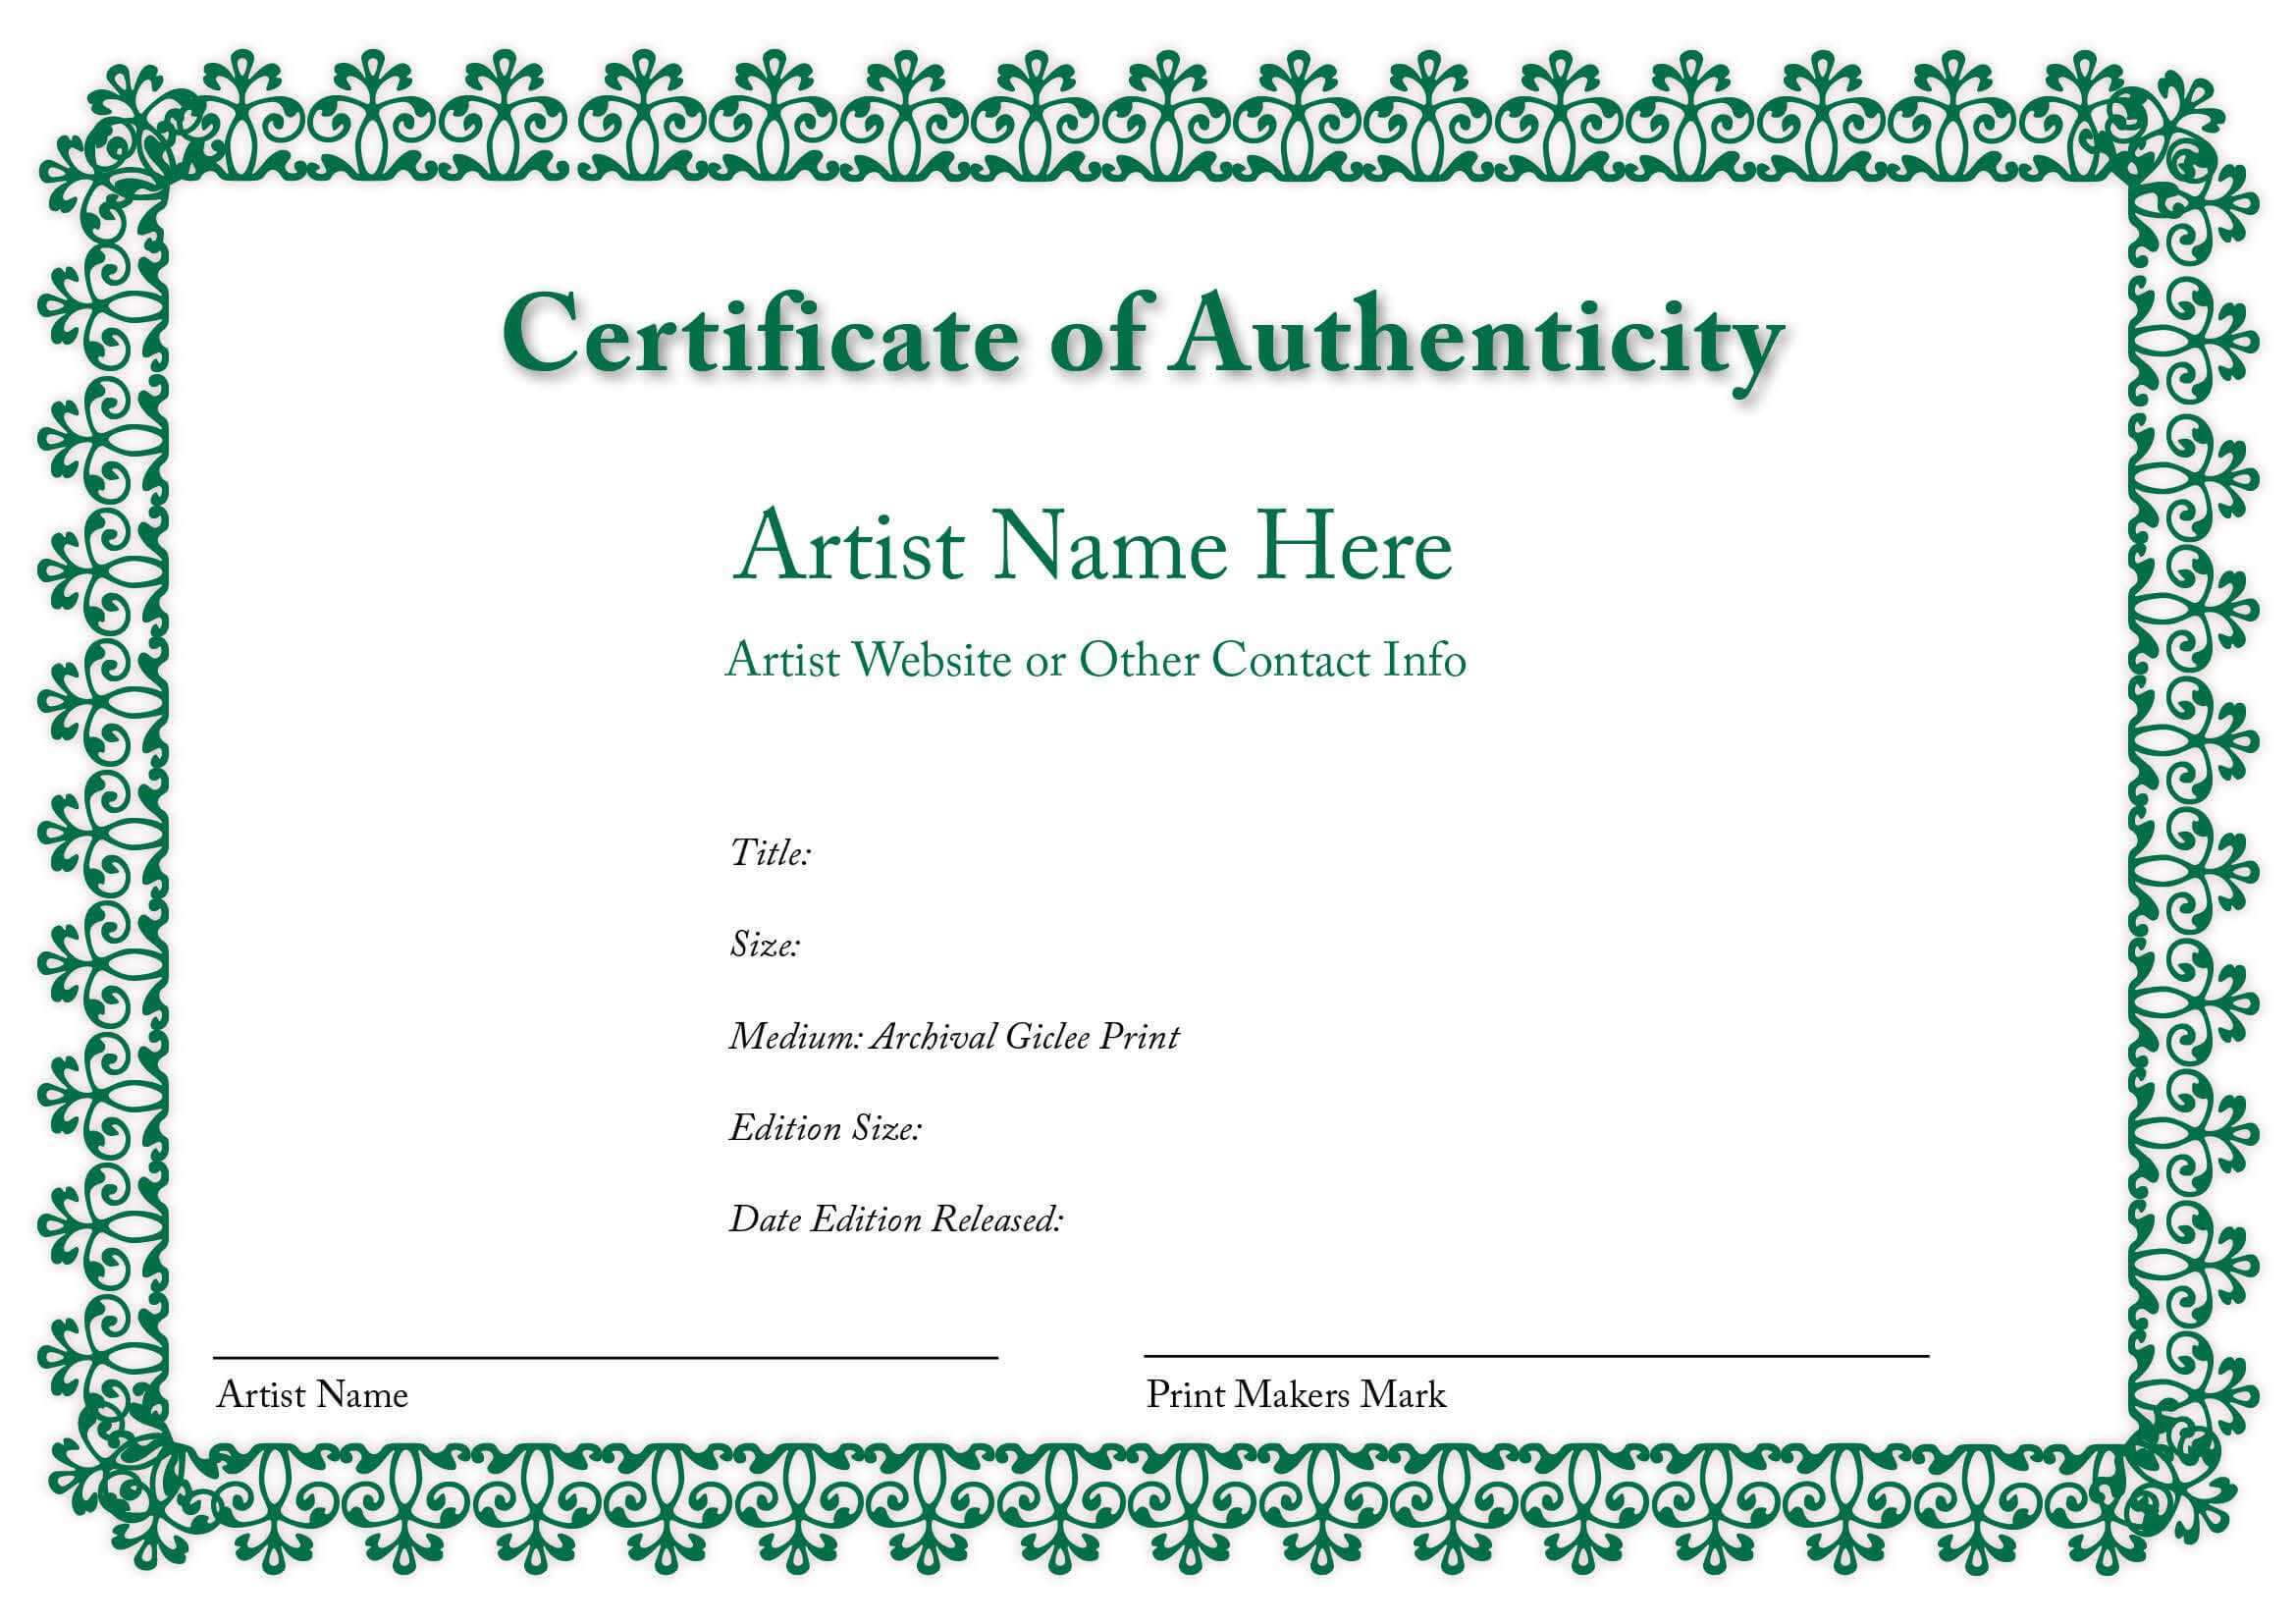 Certificate Of Authenticity Of An Art Print | Certificate Throughout Certificate Of Authenticity Template